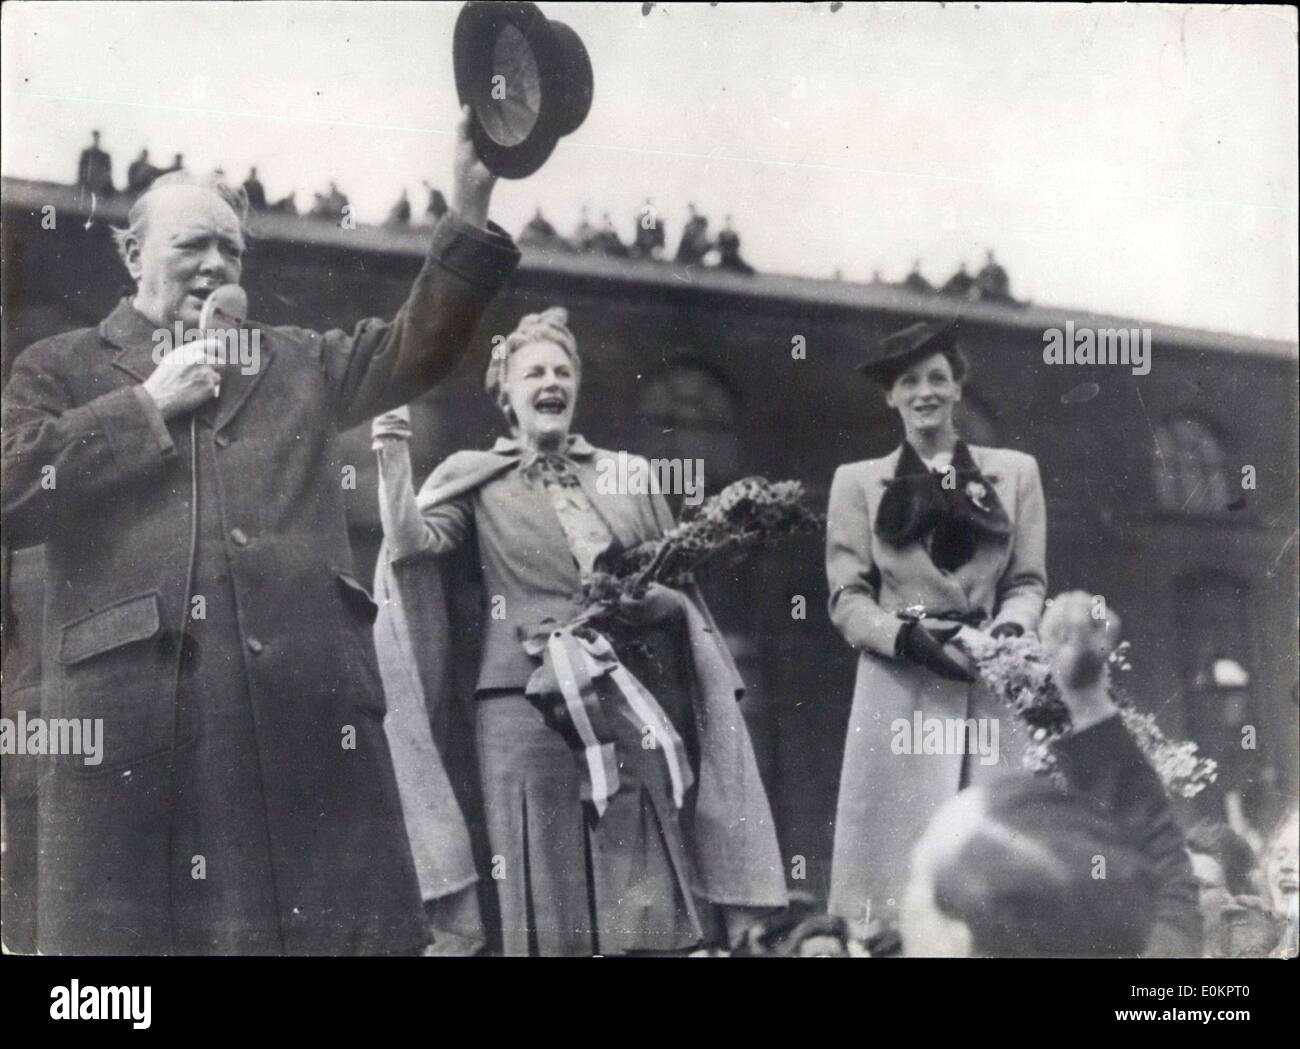 Jun. 26, 1945 - Mr. Churchill gives Election campaign Speech in Manchester. Photo shows Mr. Churchill waves his hat in acknowledgement of the cheers from the crowd. Mrs. Churchill also waves hand. Stock Photo